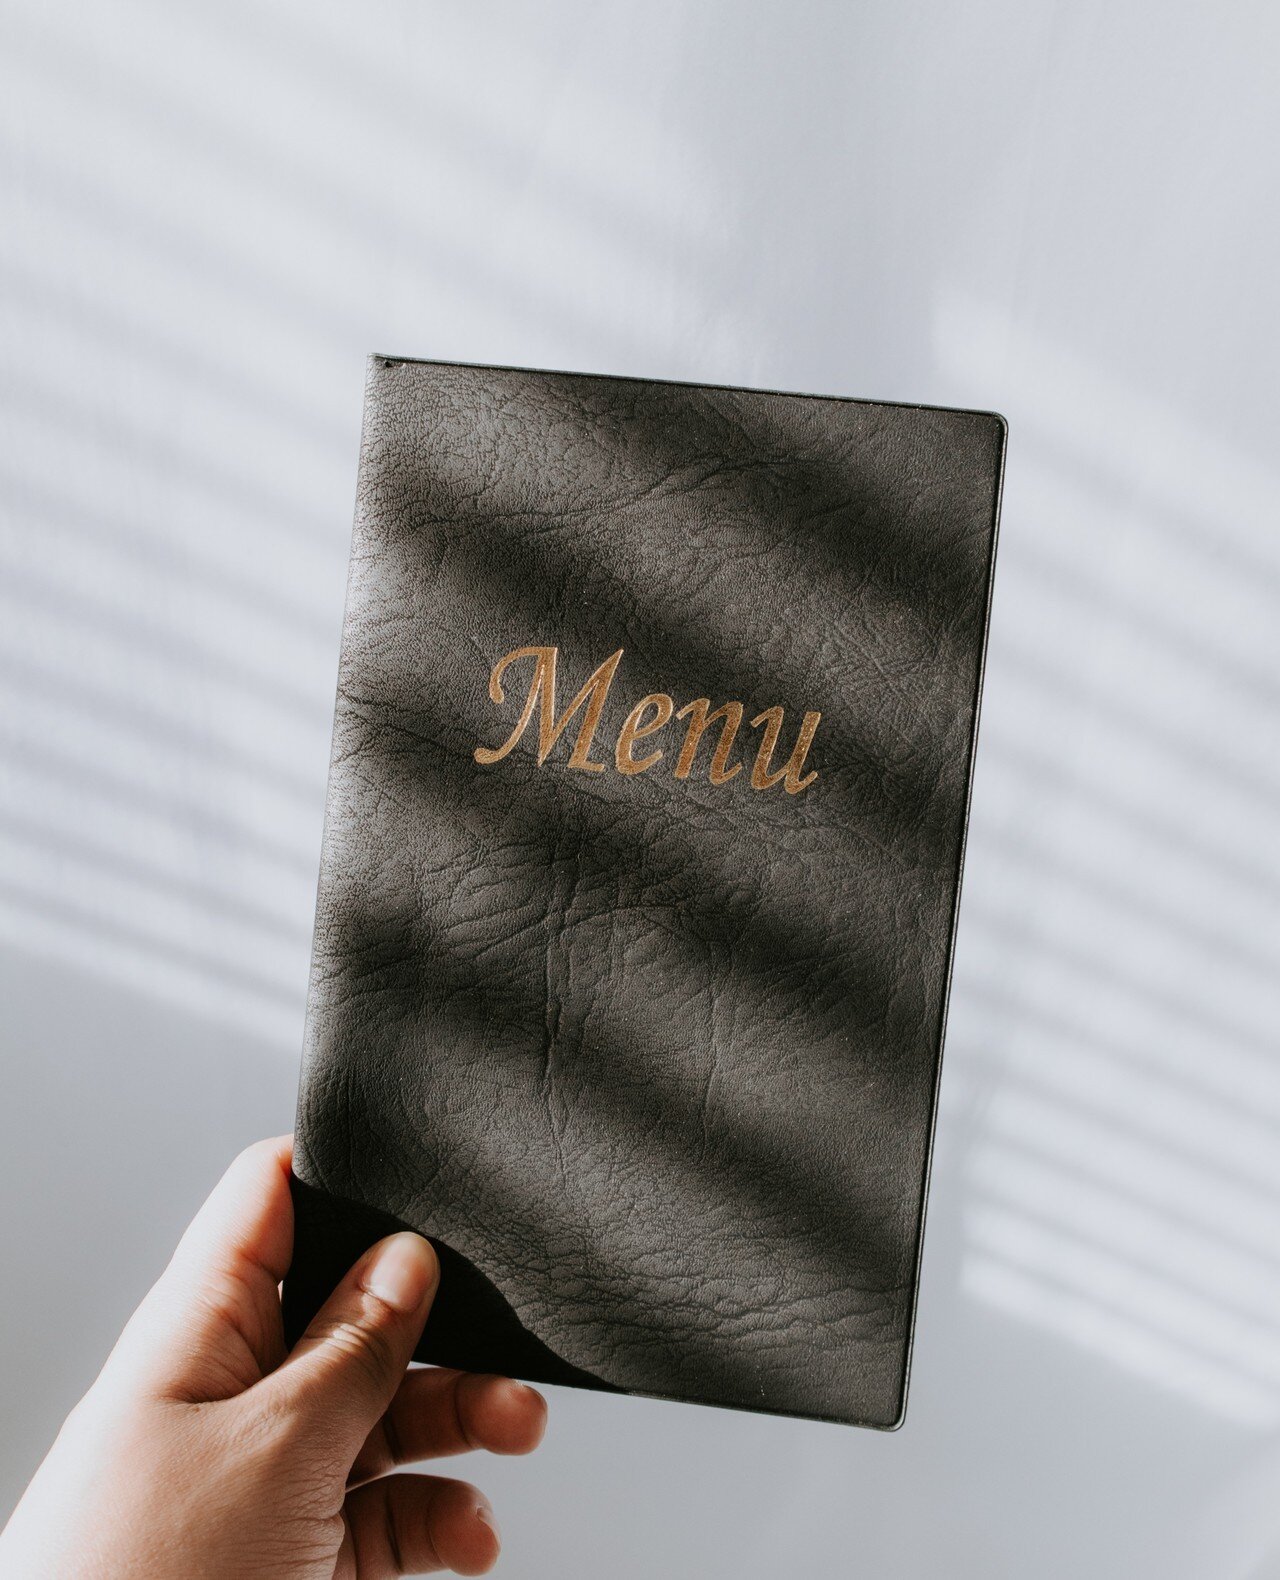 Our black heat-sealed vinyl menu covers provide a stylish and cost-effective way to protect your restaurant's menus. These book style menu covers are made of top-quality, smooth, slight-grained black material with sturdy heat sealed borders to give e